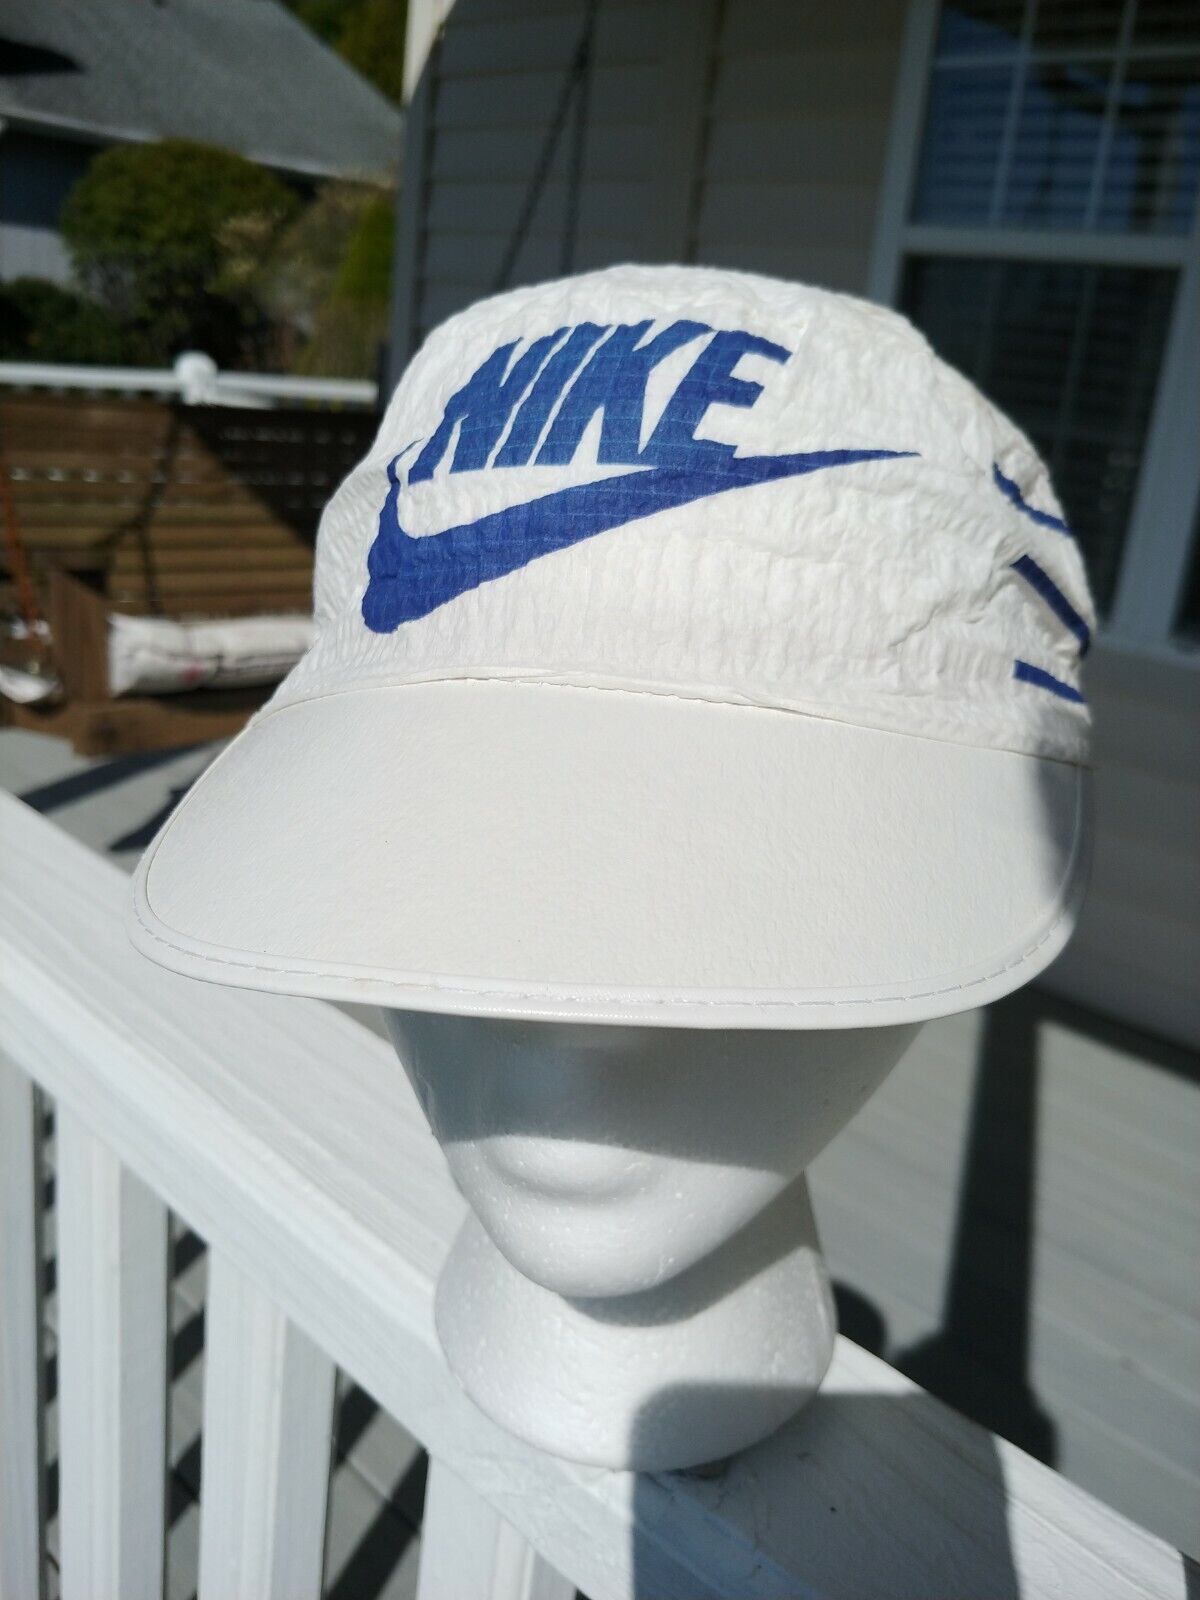 Vintage 1983-84 Nike Painters or Running Cap Swoosh Striped Pill